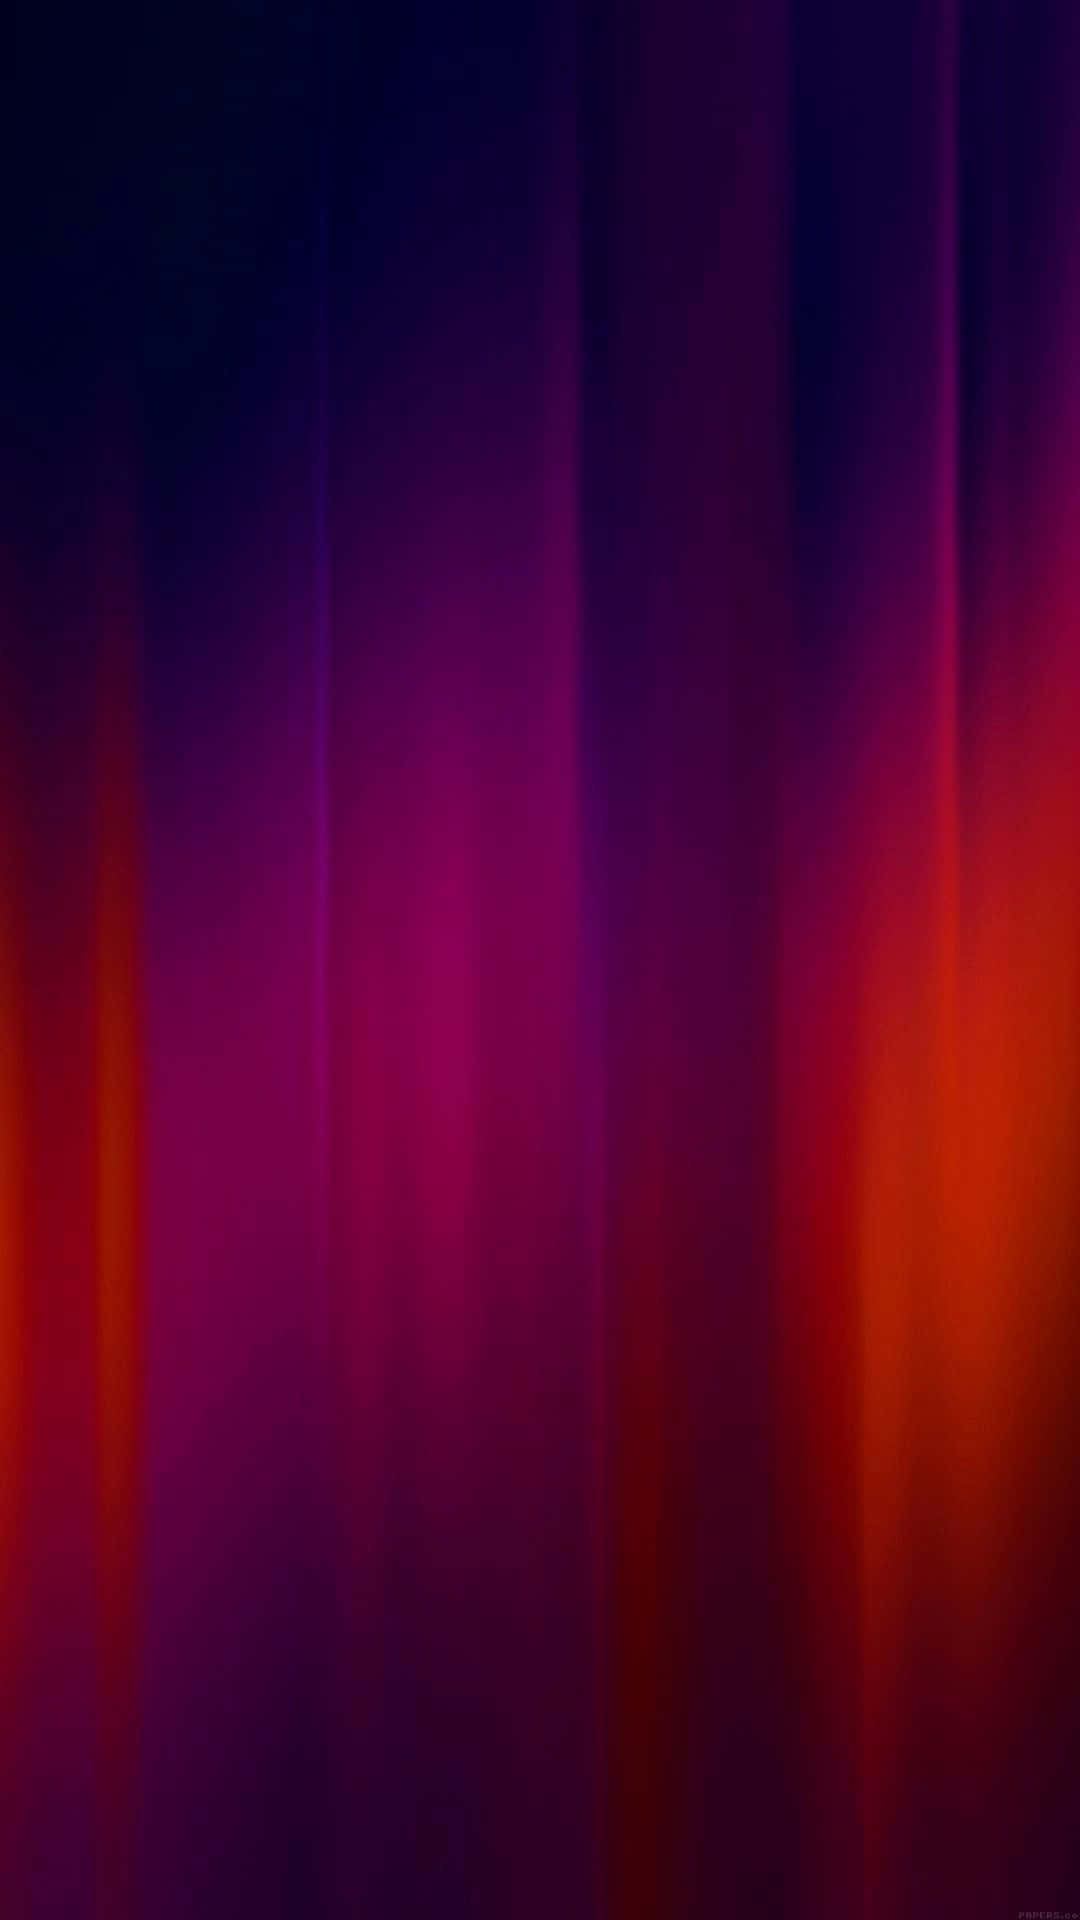 Smooth Gradient In Red And Purple Background